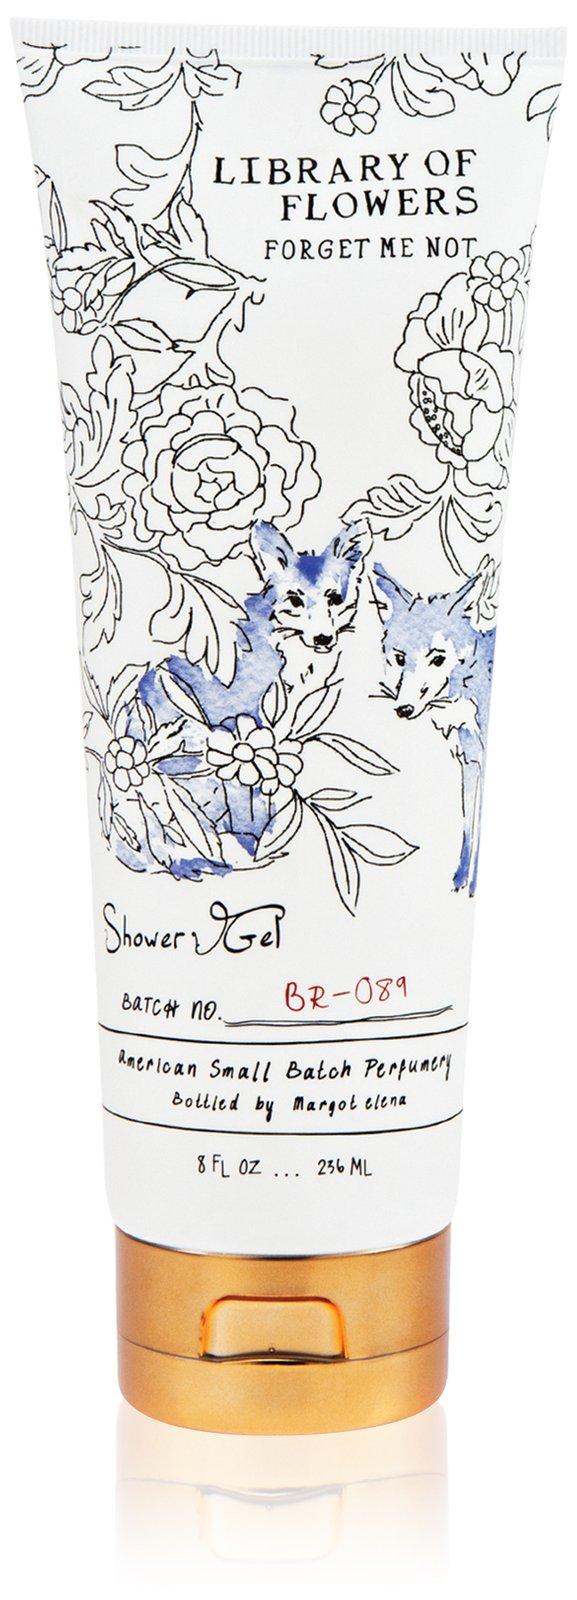 Library Of Flowers Shower Gel - Forget Me Not - 16 Oz